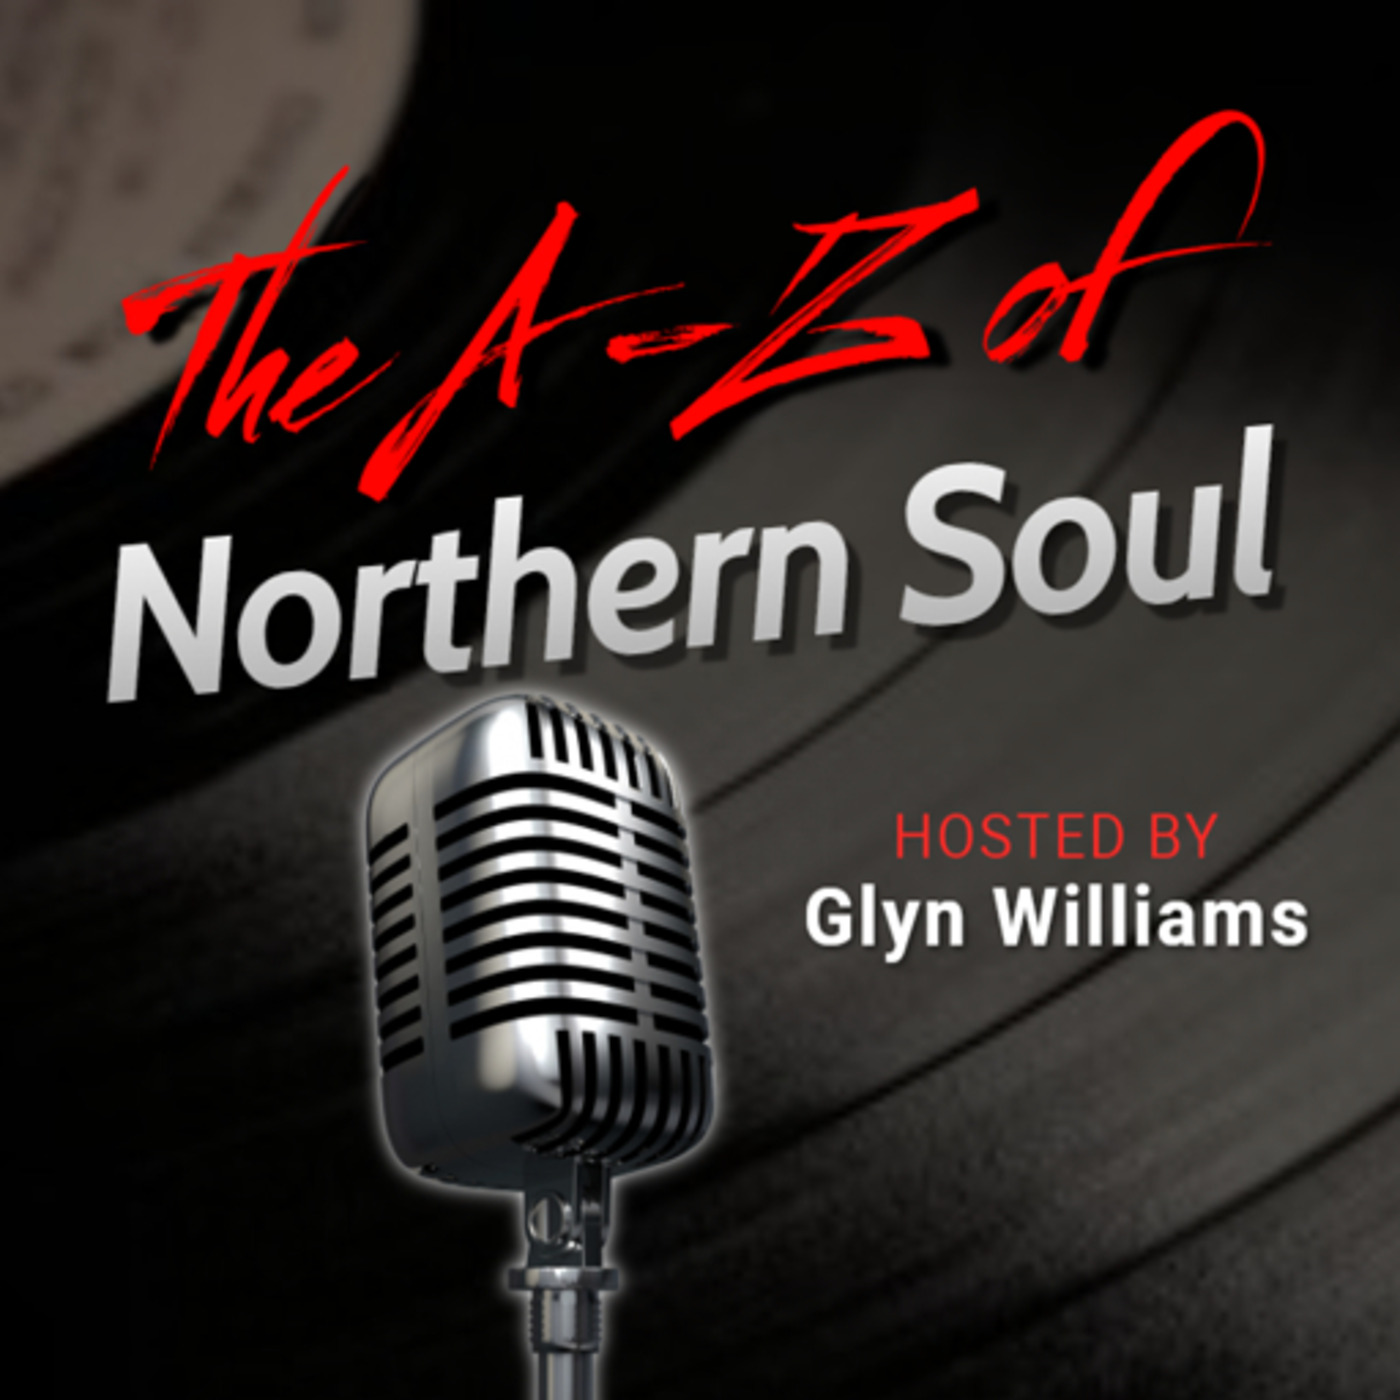 The A-Z of Northern Soul E065